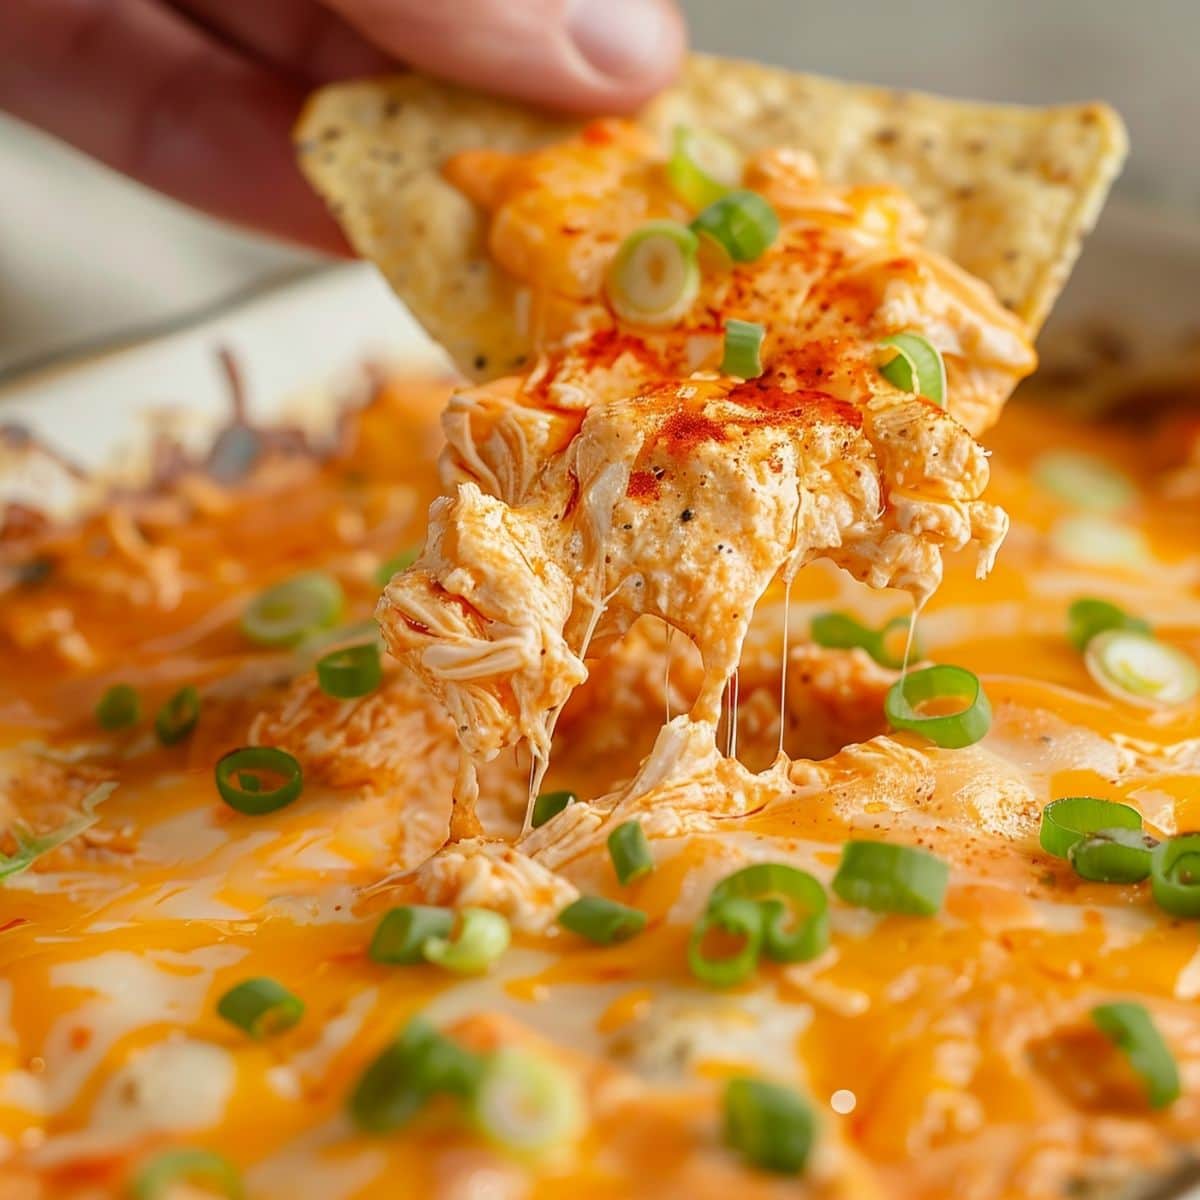 Close Up of Tortilla Chip Scooping Gooey, Cheesy Frank's Buffalo Chicken Dip with Green Onions